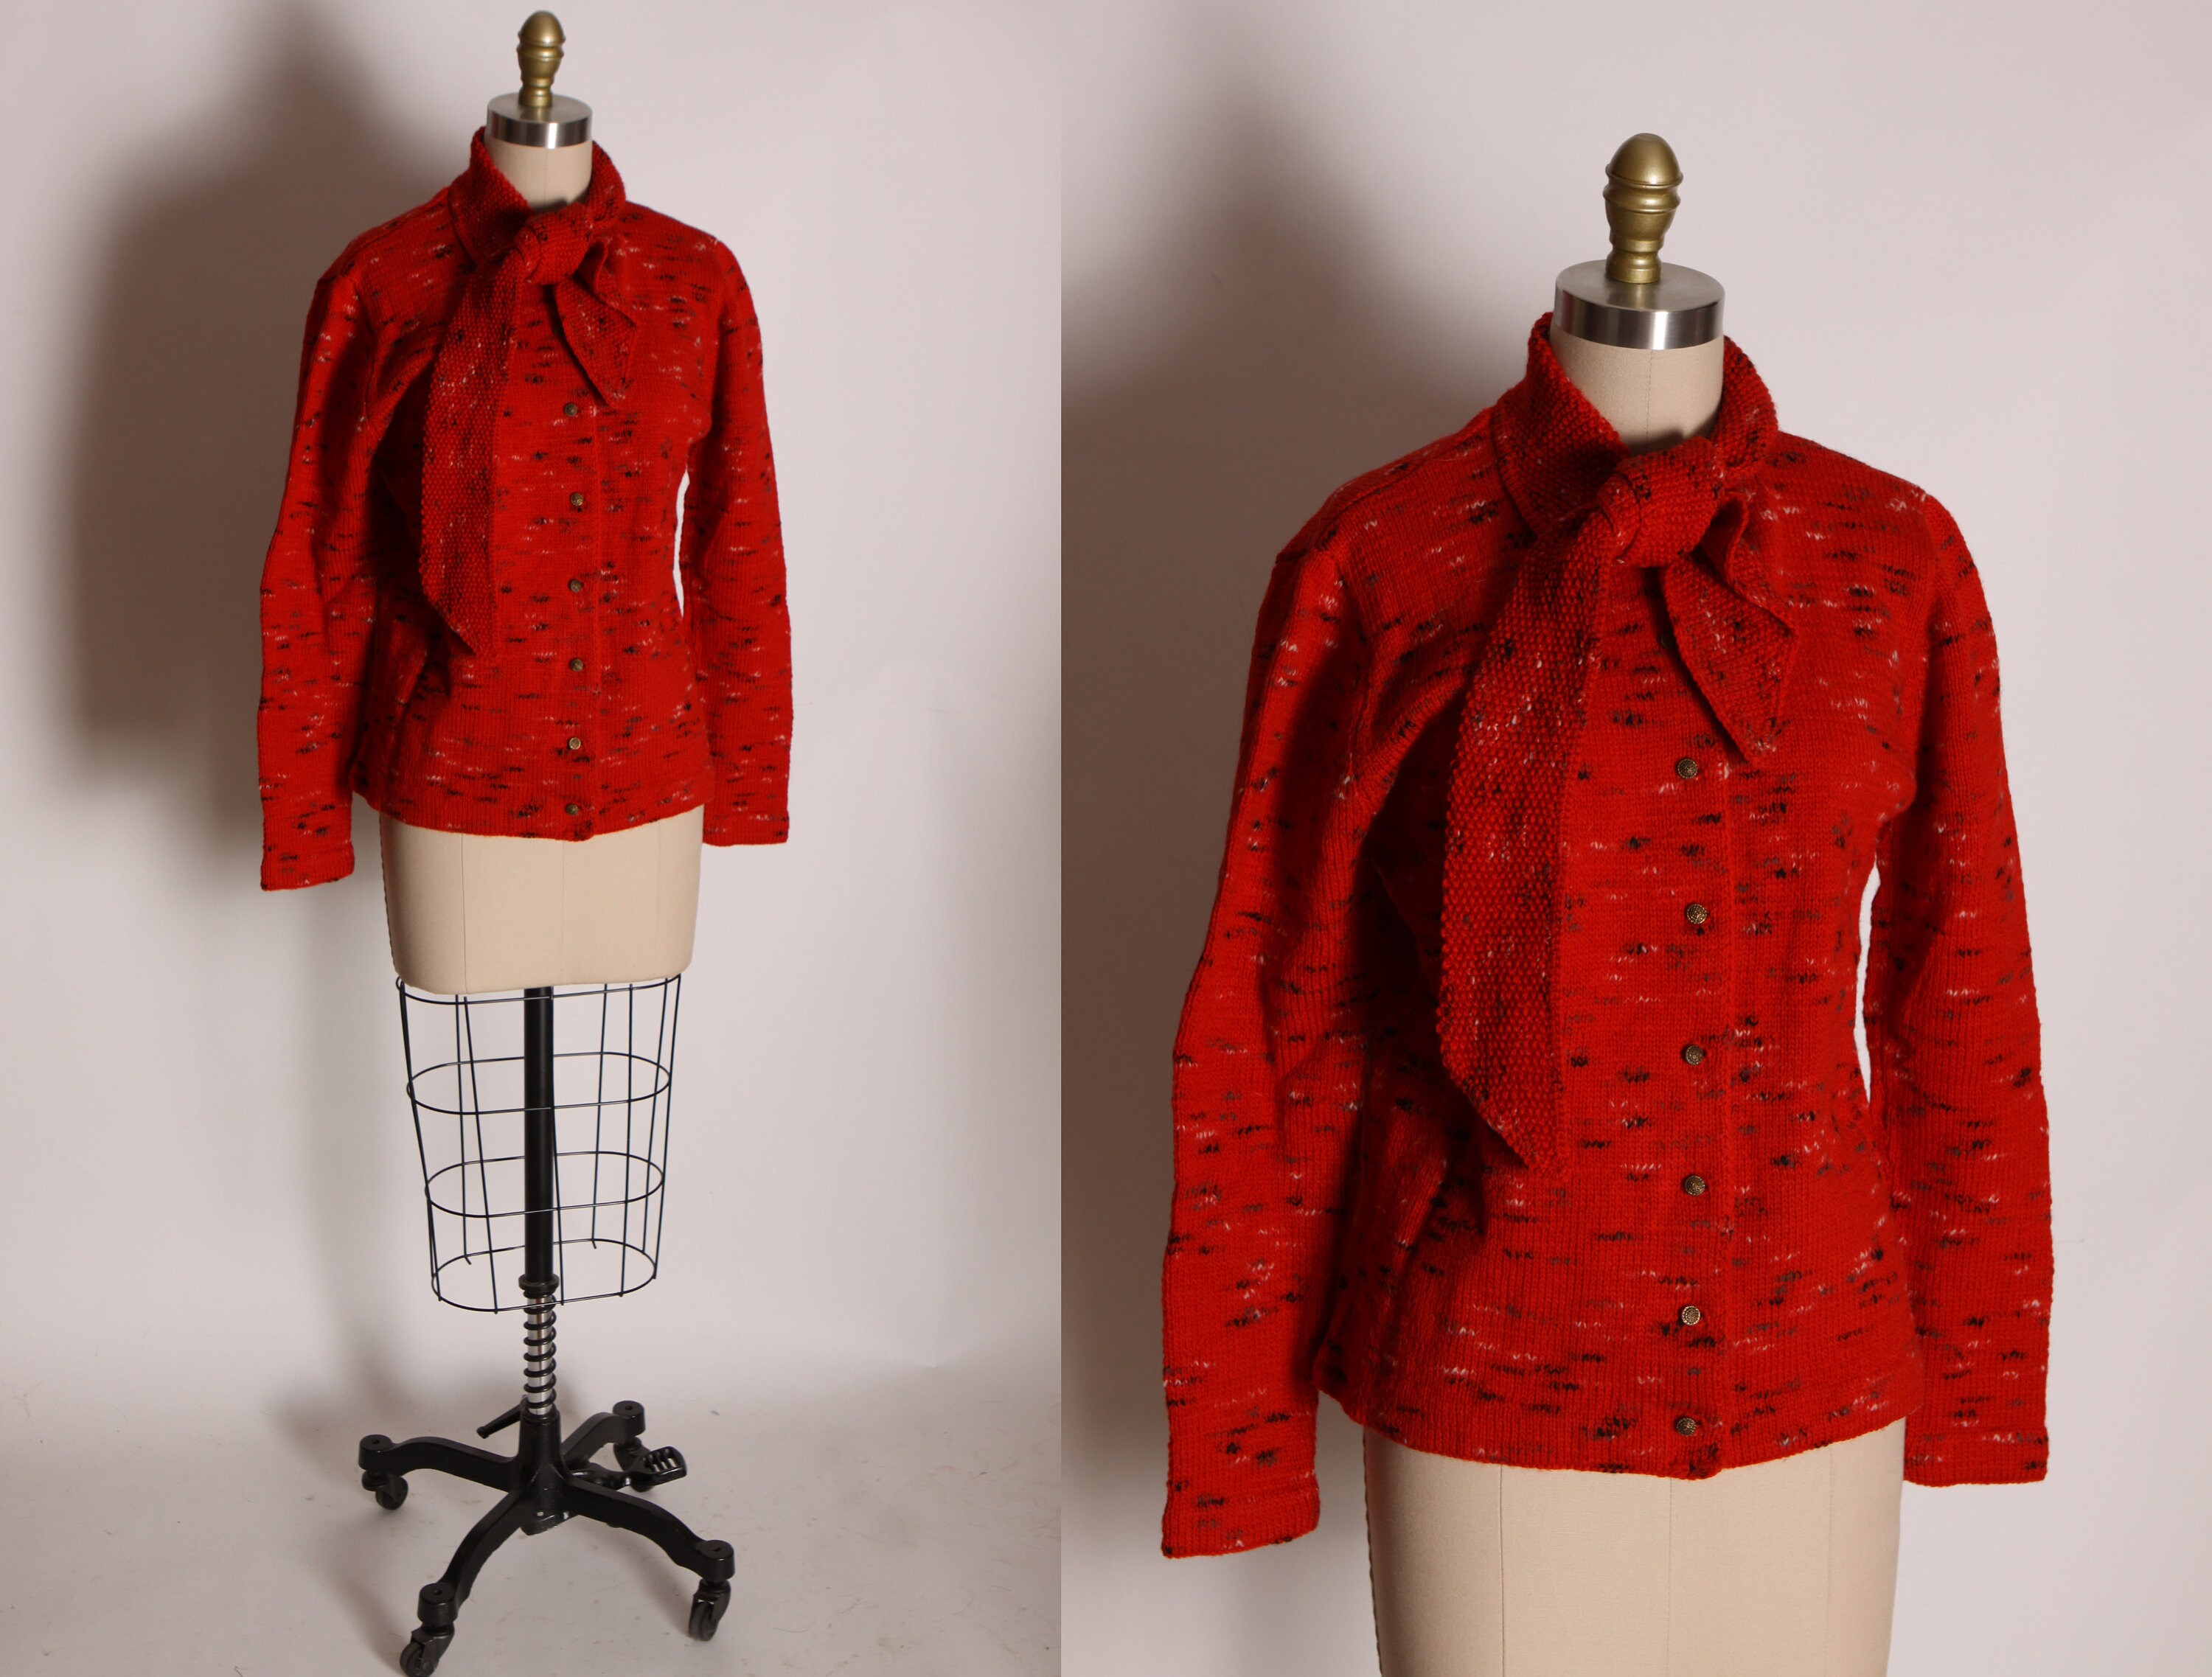 Vintage Scarf Styles -1920s to 1980s 1960S Red  Black Flecked Wool Knit Long Sleeve Scarf Collar Button Up Sweater Cardigan -L $68.00 AT vintagedancer.com